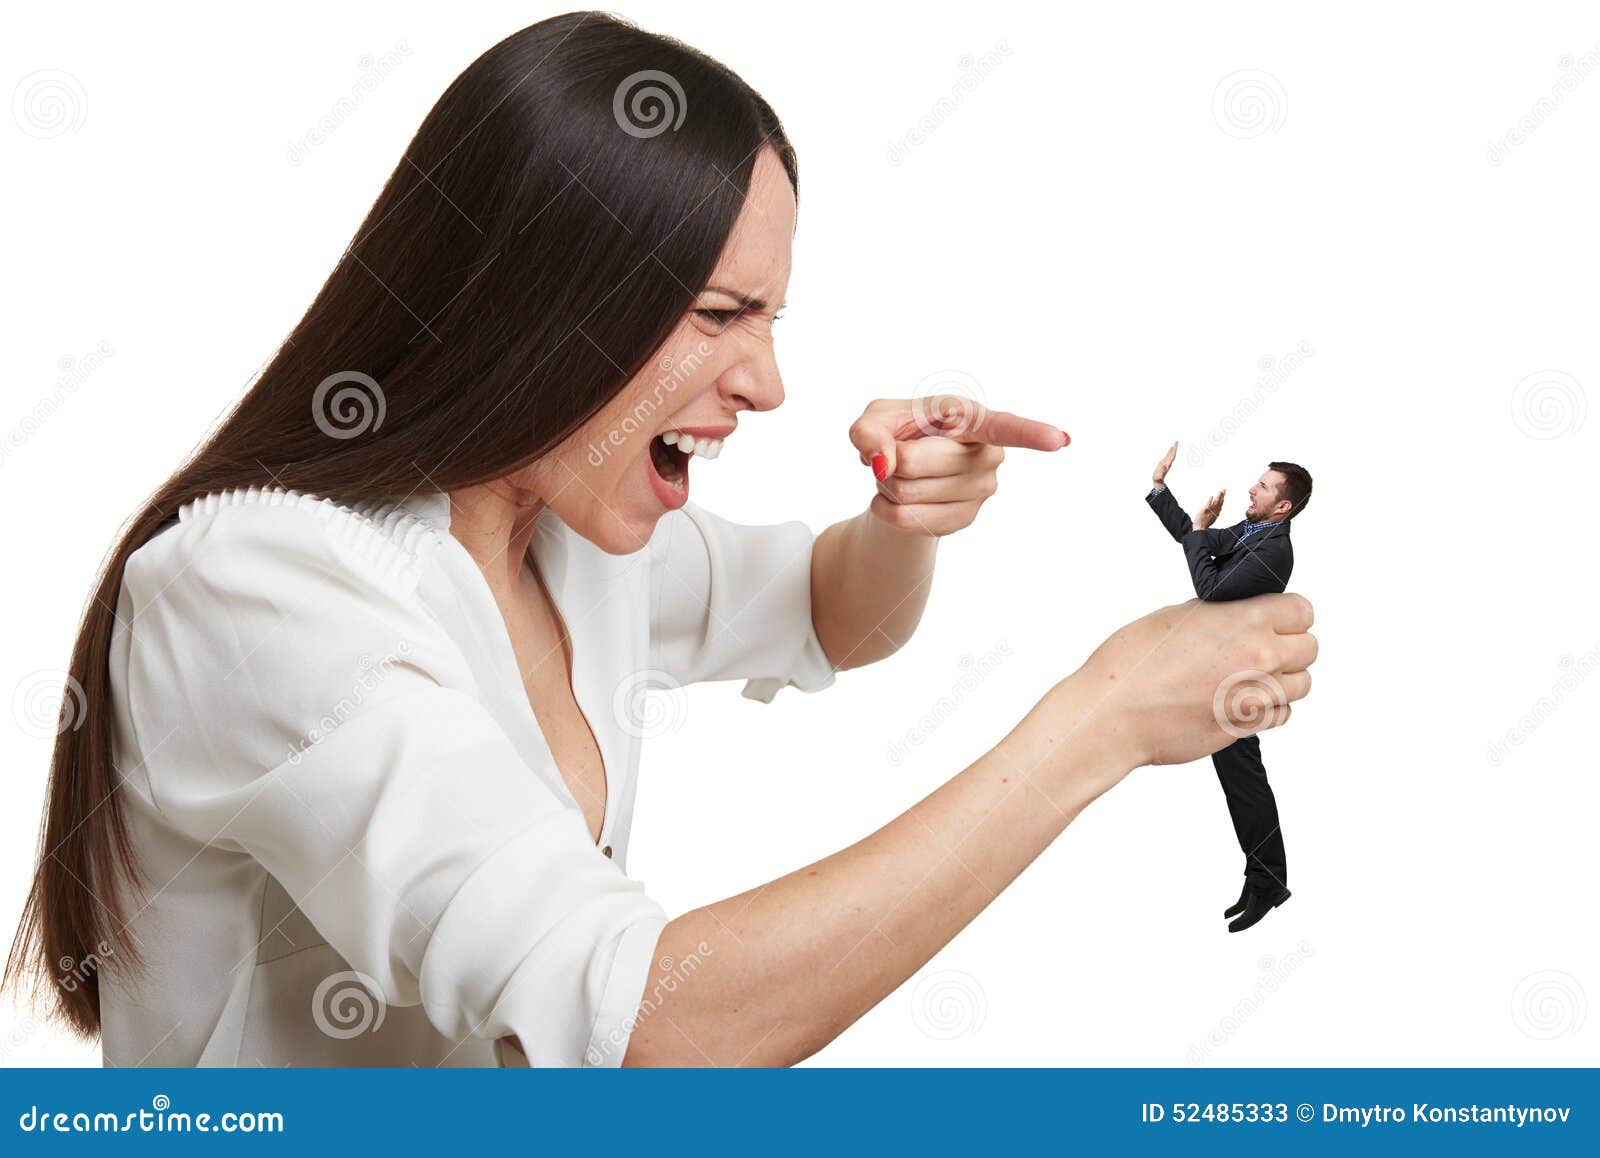 yelling woman pointing at small scared man